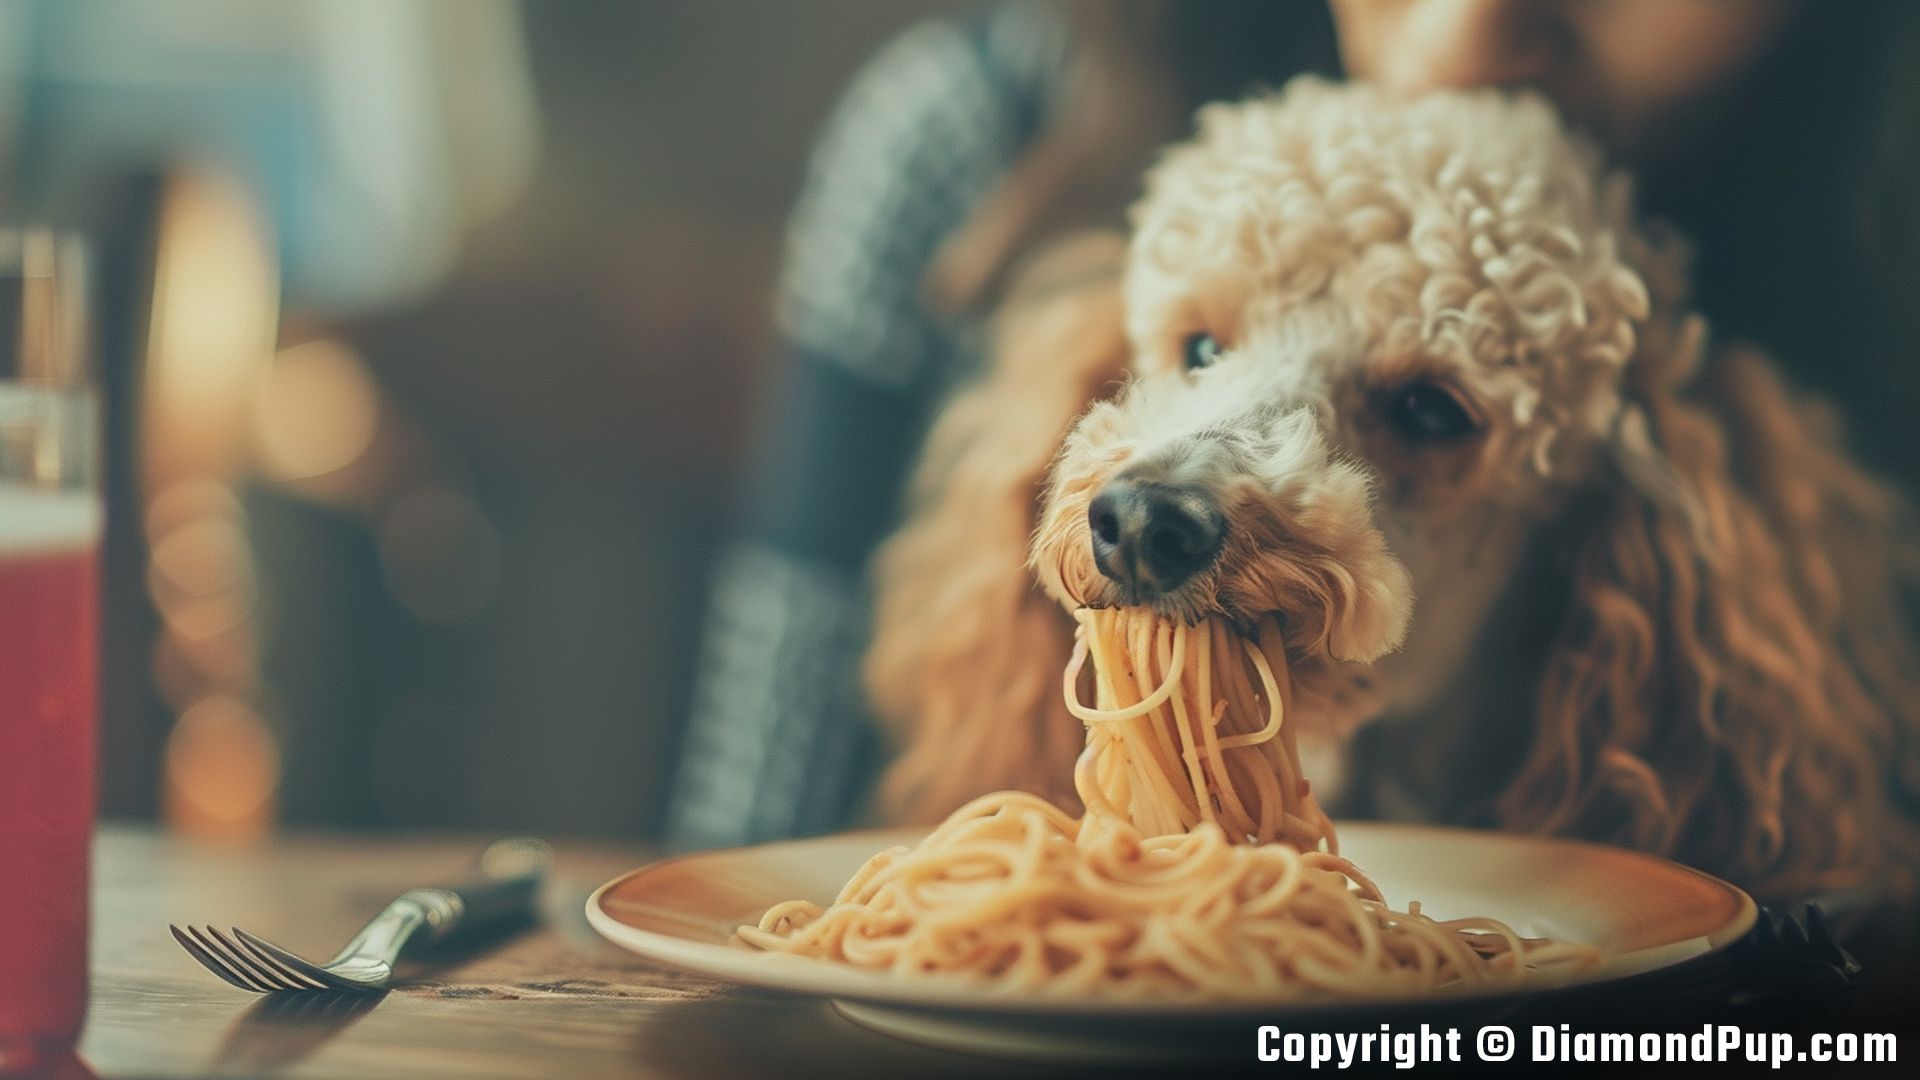 Photograph of an Adorable Poodle Snacking on Pasta